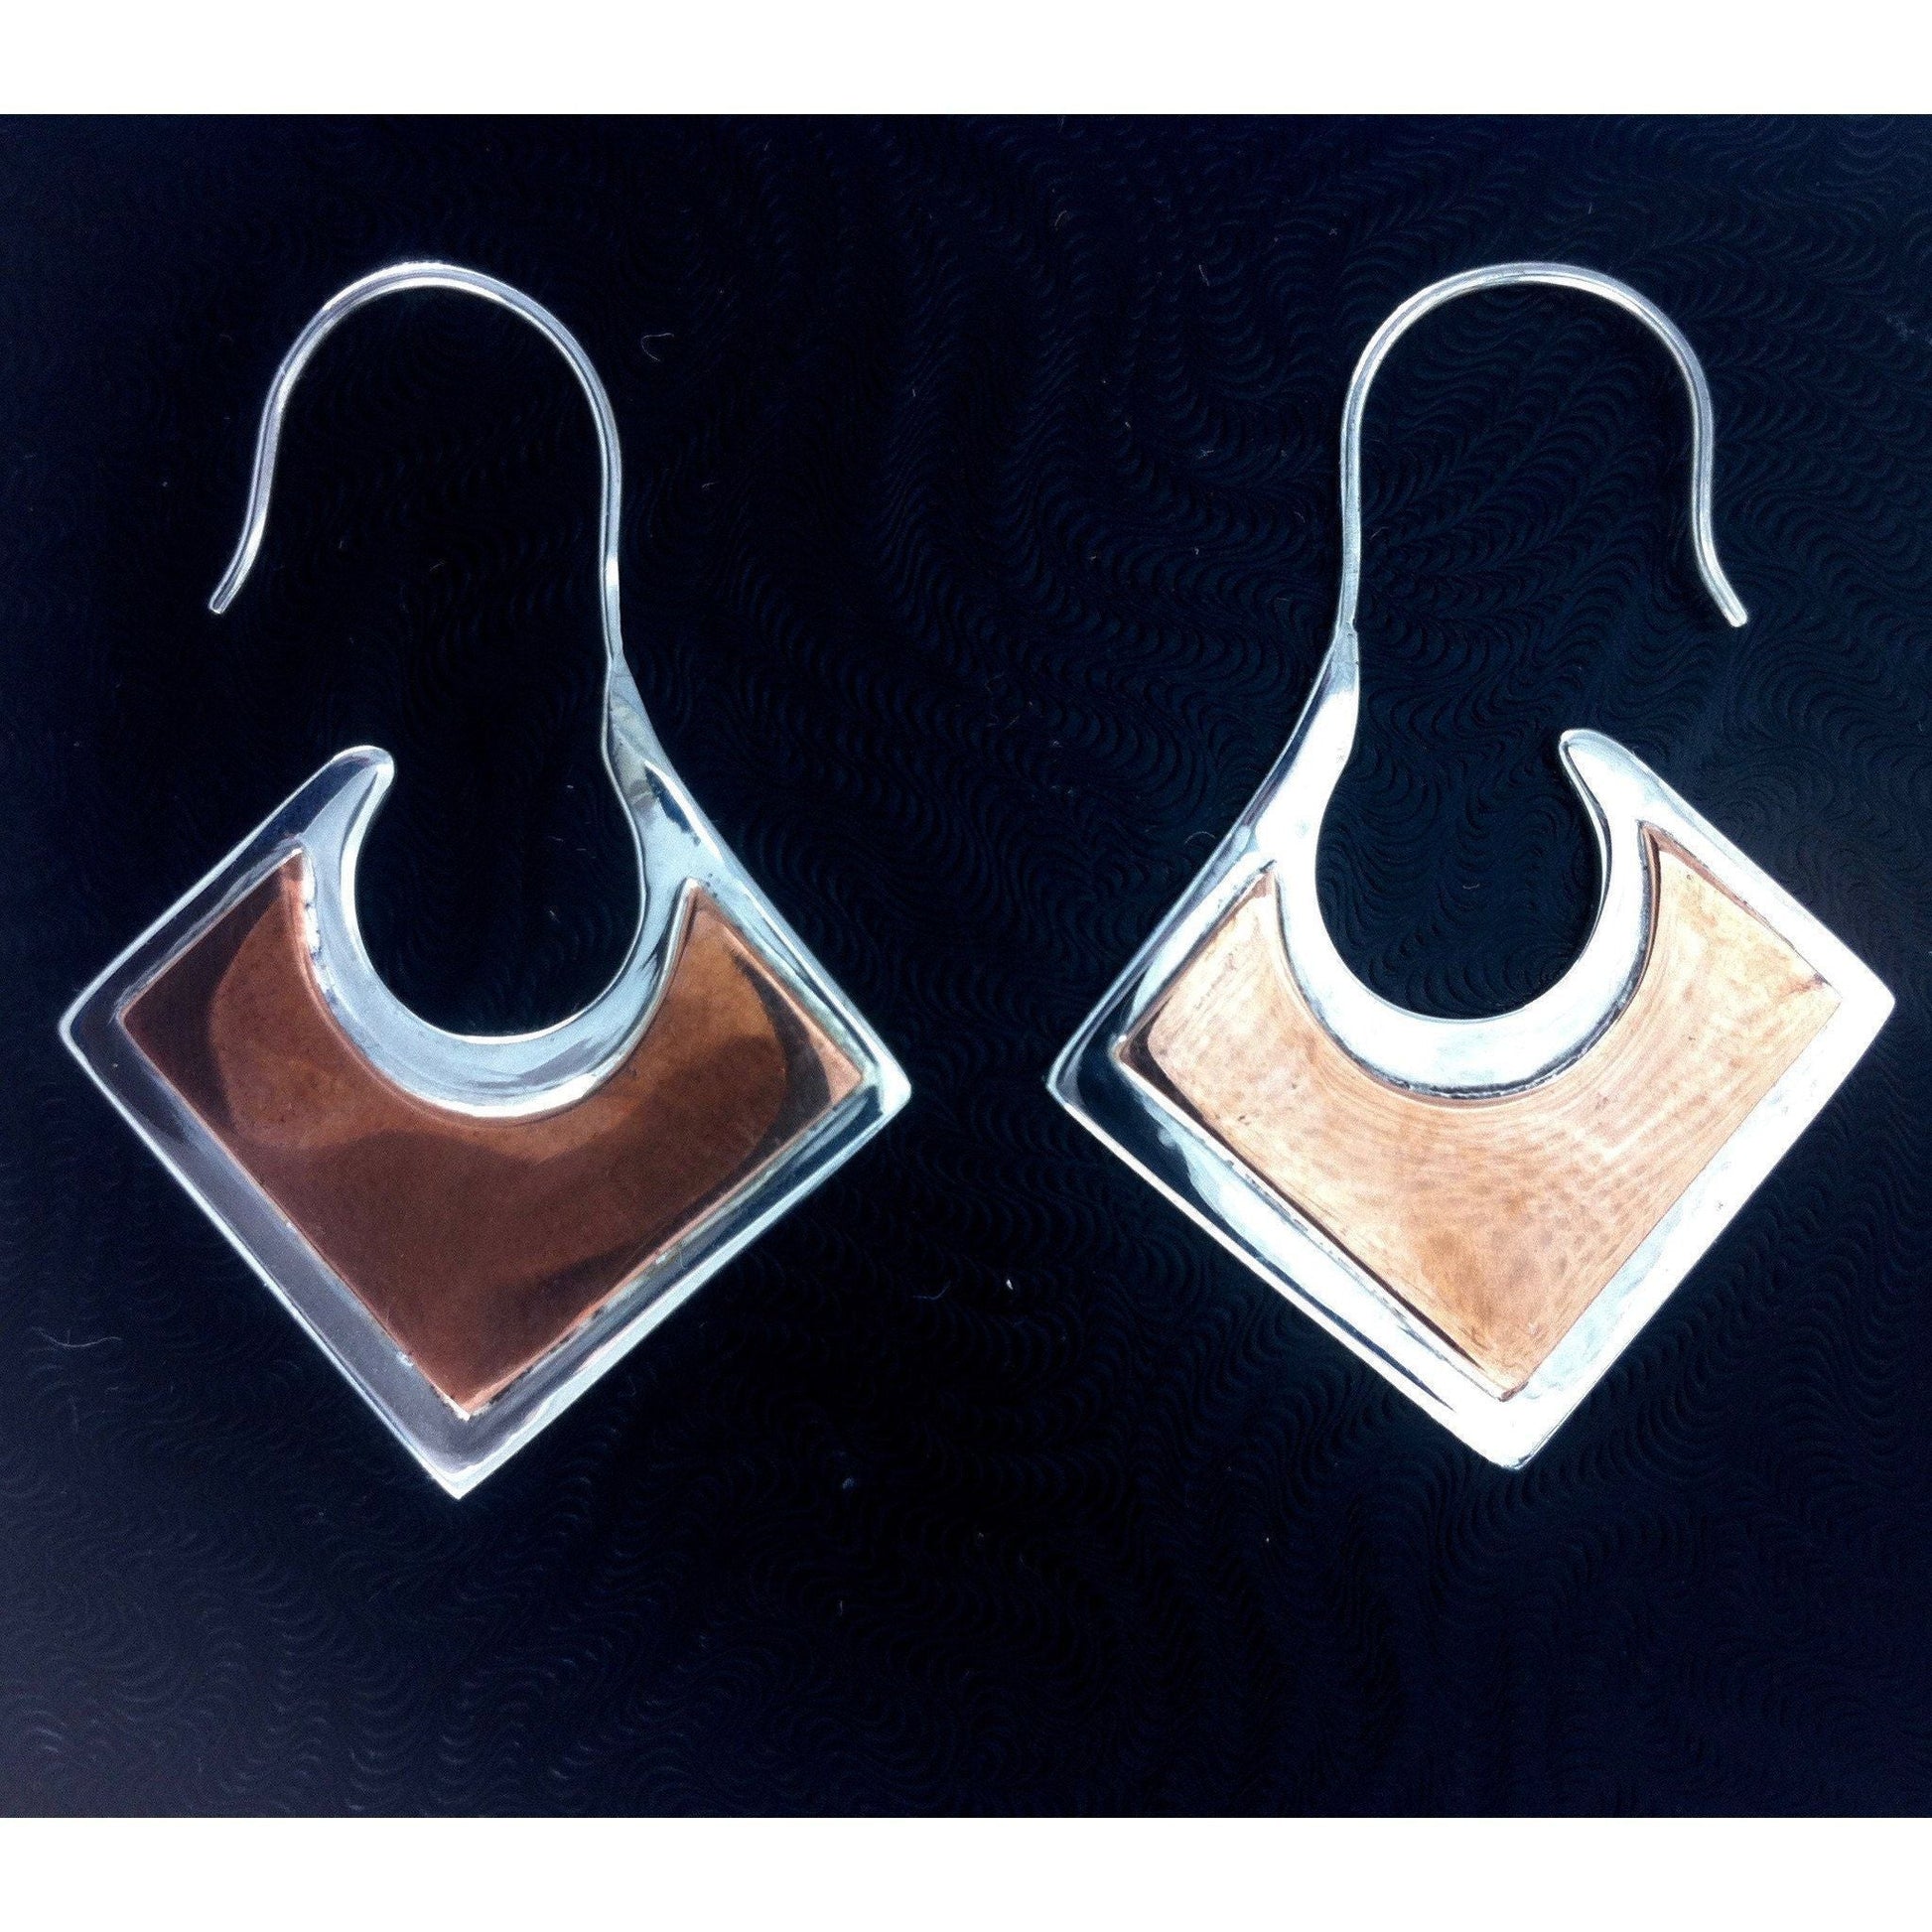 Tribal Earrings :|: Copper and Silver. sterling silver with copper highlights earrings.